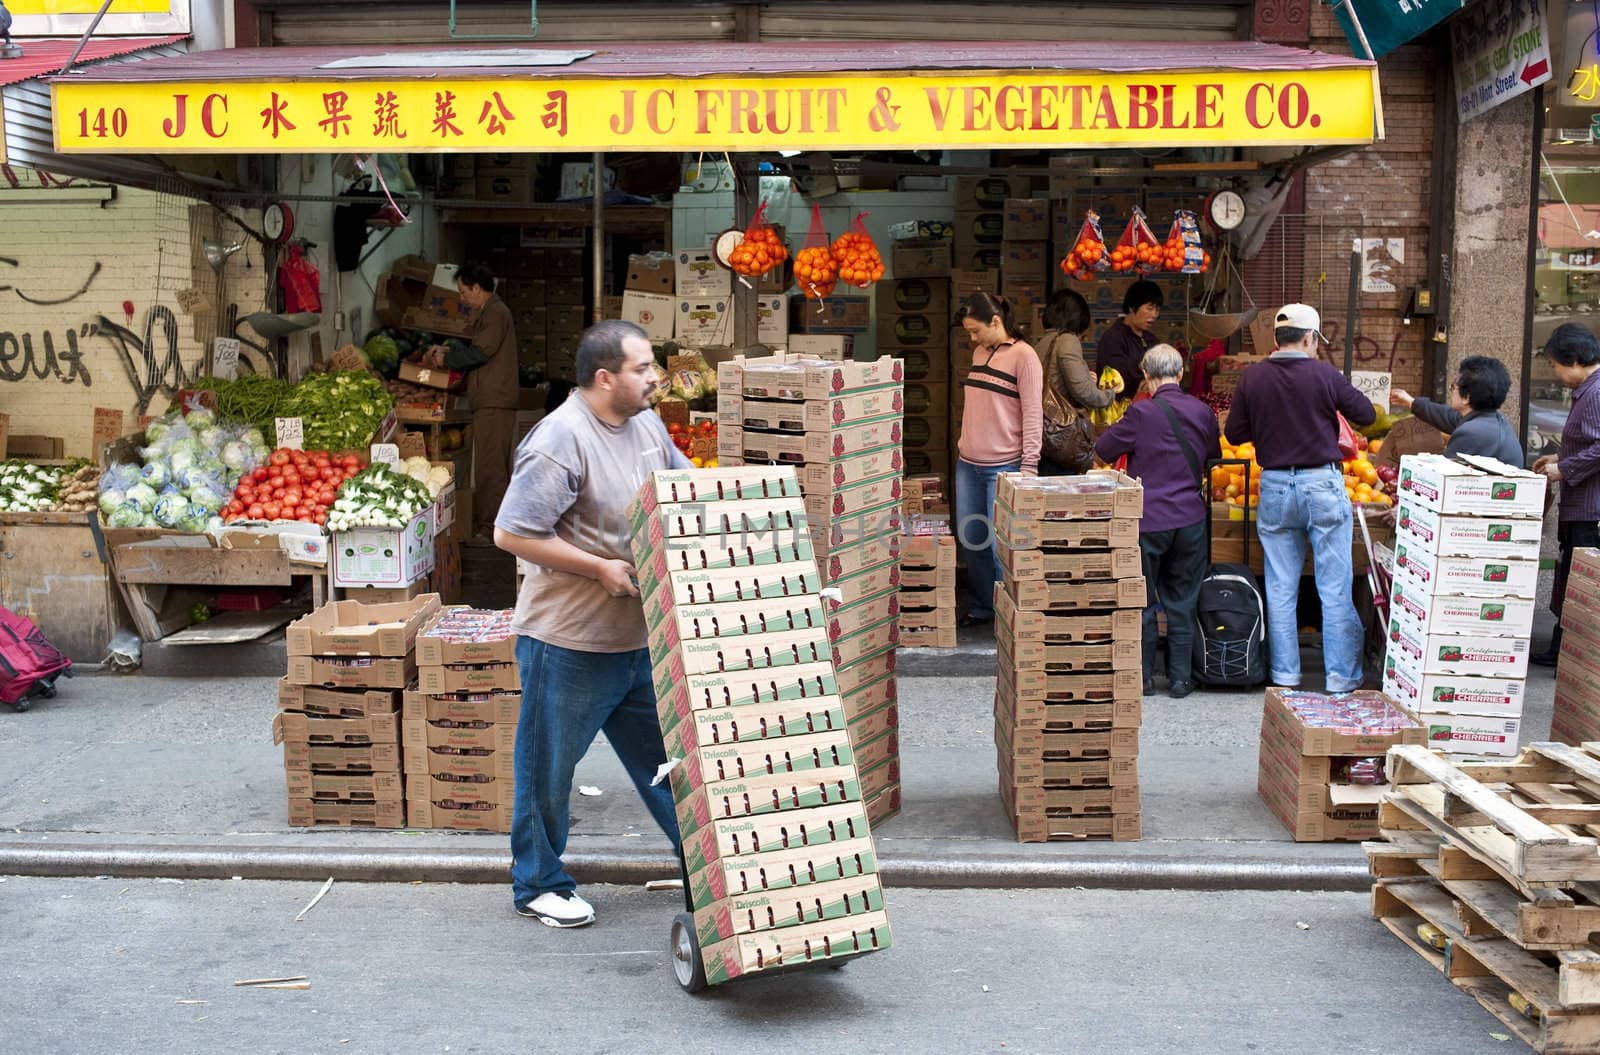 Man deliverying produce in Chinatown, NYC by rongreer